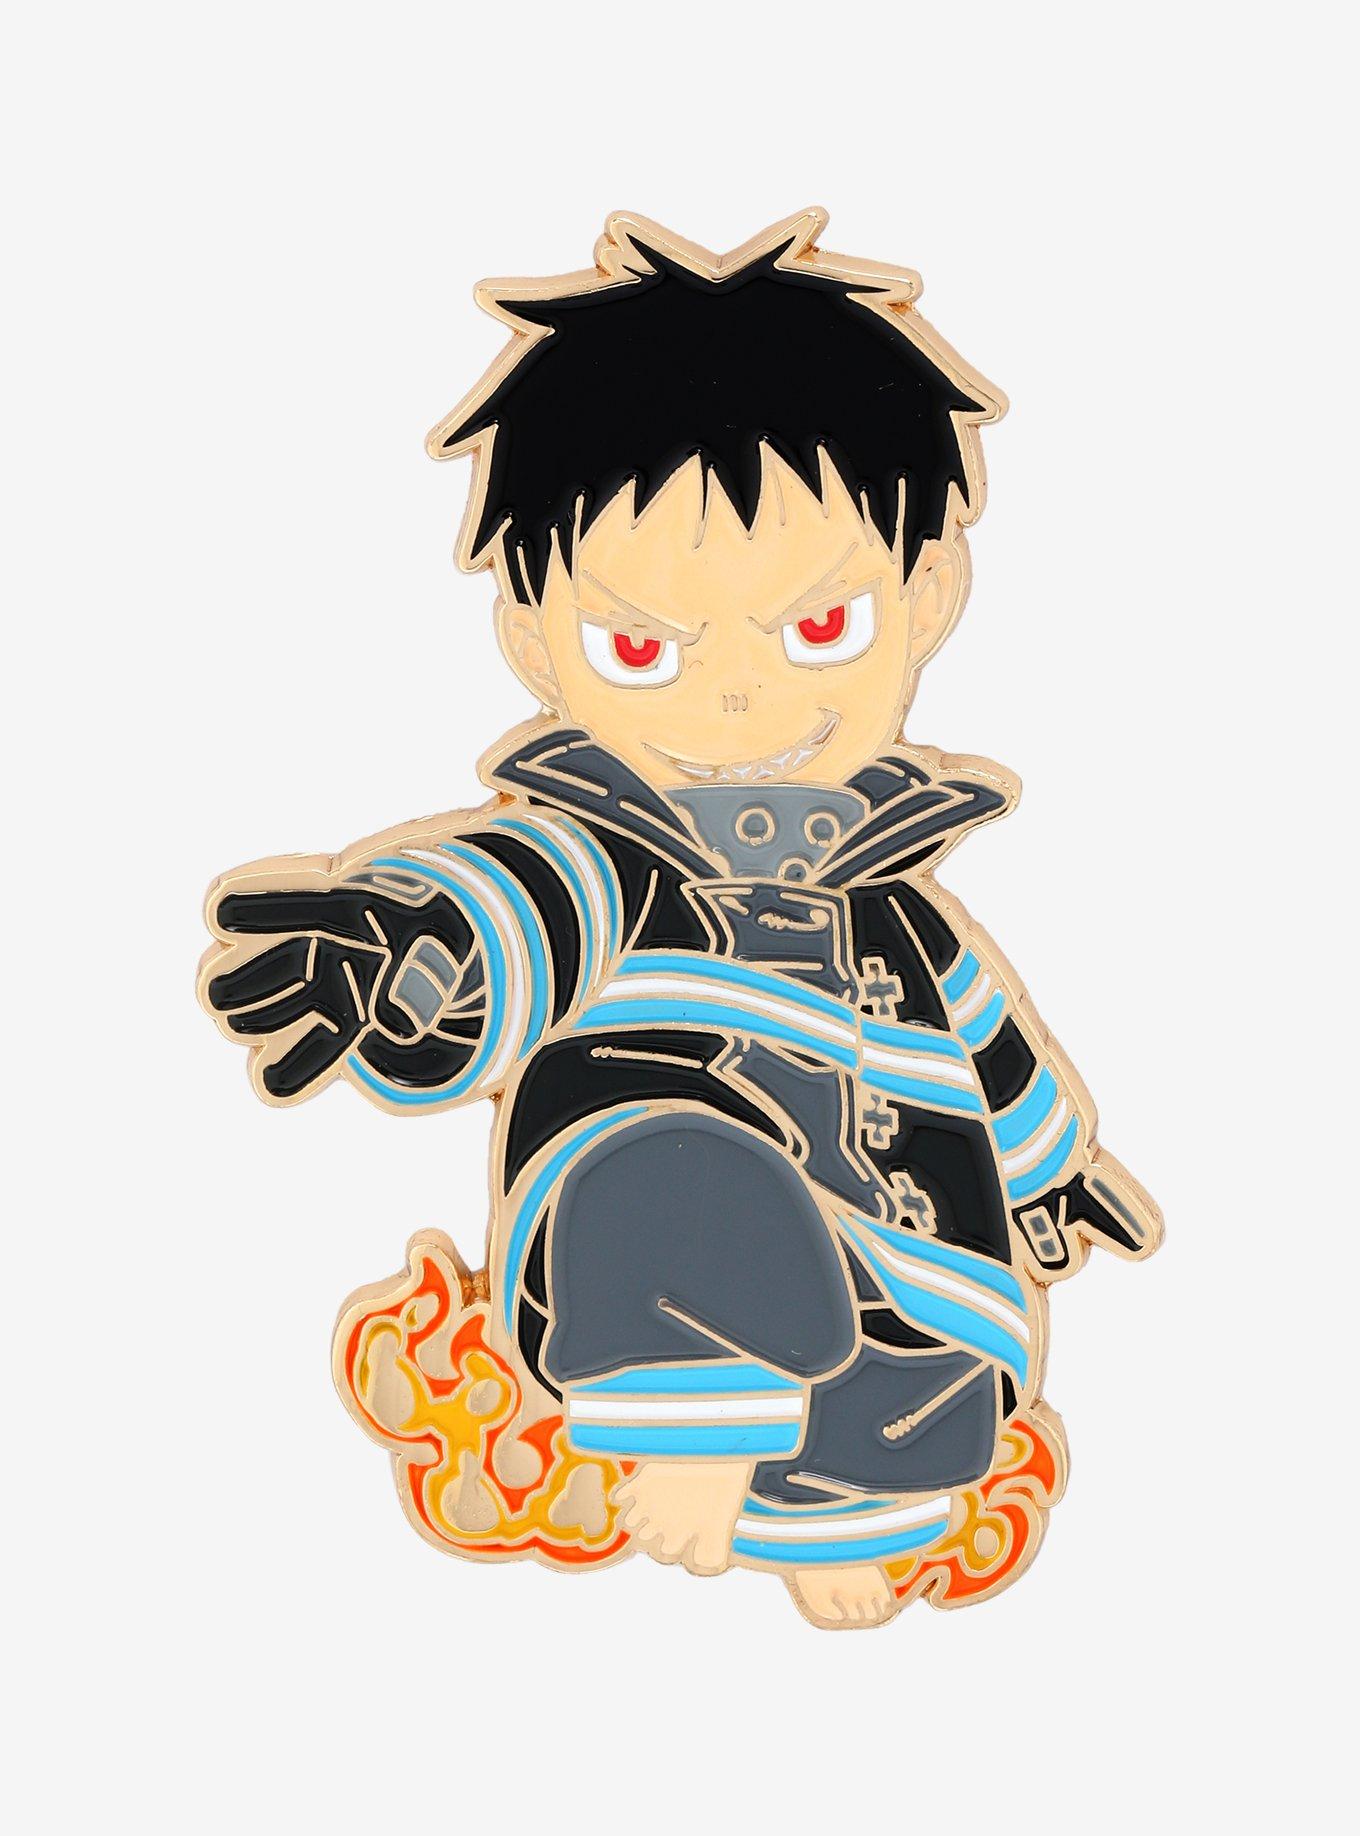 Where does Shinra Kusakabe (Fire Force) currently scale, in the